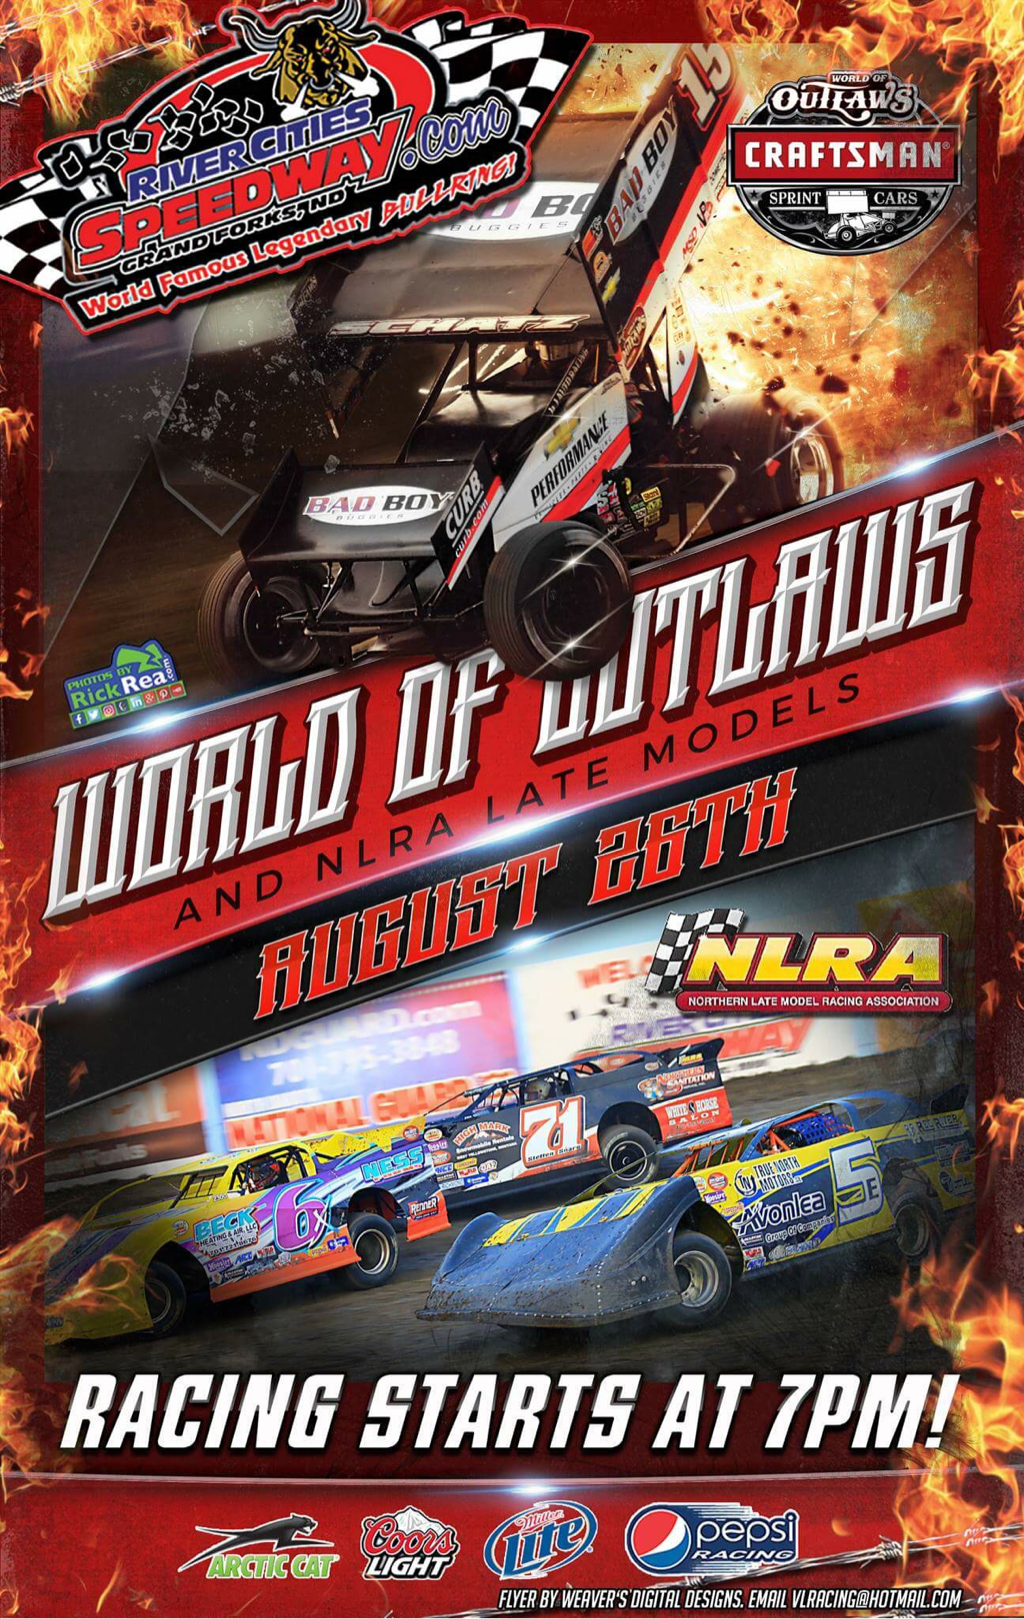 World of Outlaws Sprint Cars NLRA Late Models at River Cities Speedway Enjoy Outlaw Sprints and Late Models at the Best Dirt Track in America 